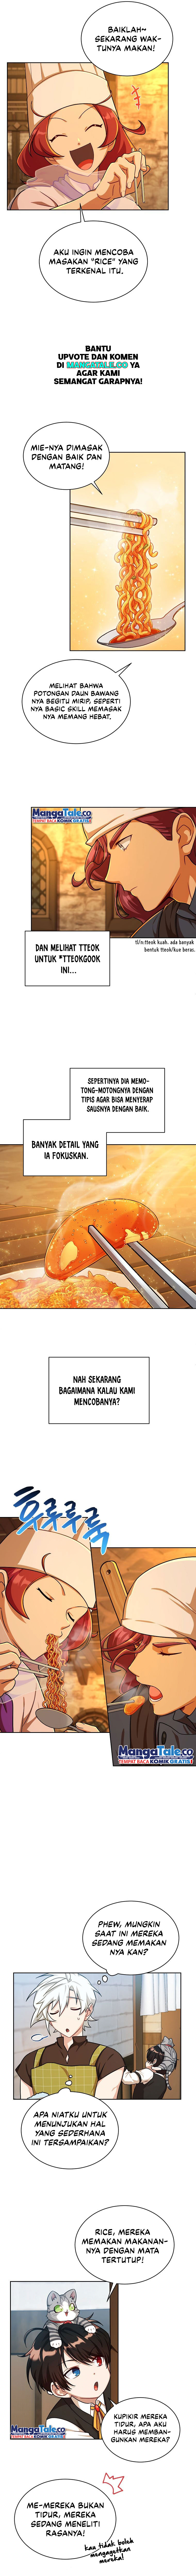 Please Have A Meal Chapter 85